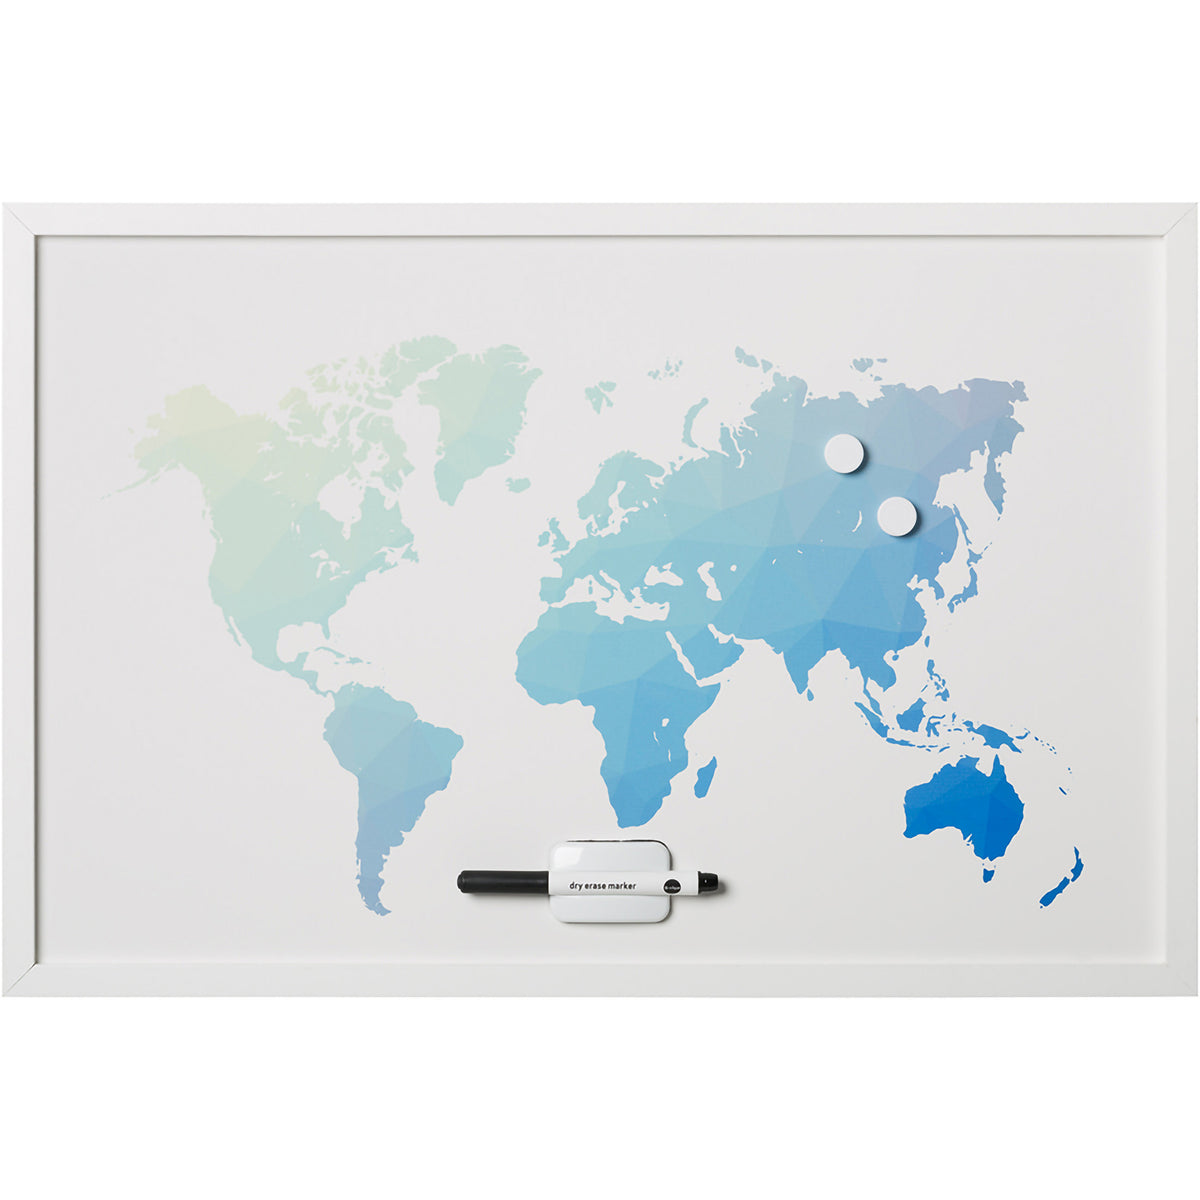 MM07450660 World Map Dry Erase White Board, Magnetic & Wall Mounting, Includes Marker, Eraser & Magnets, 24" x 36", White Wood Frame by MasterVision